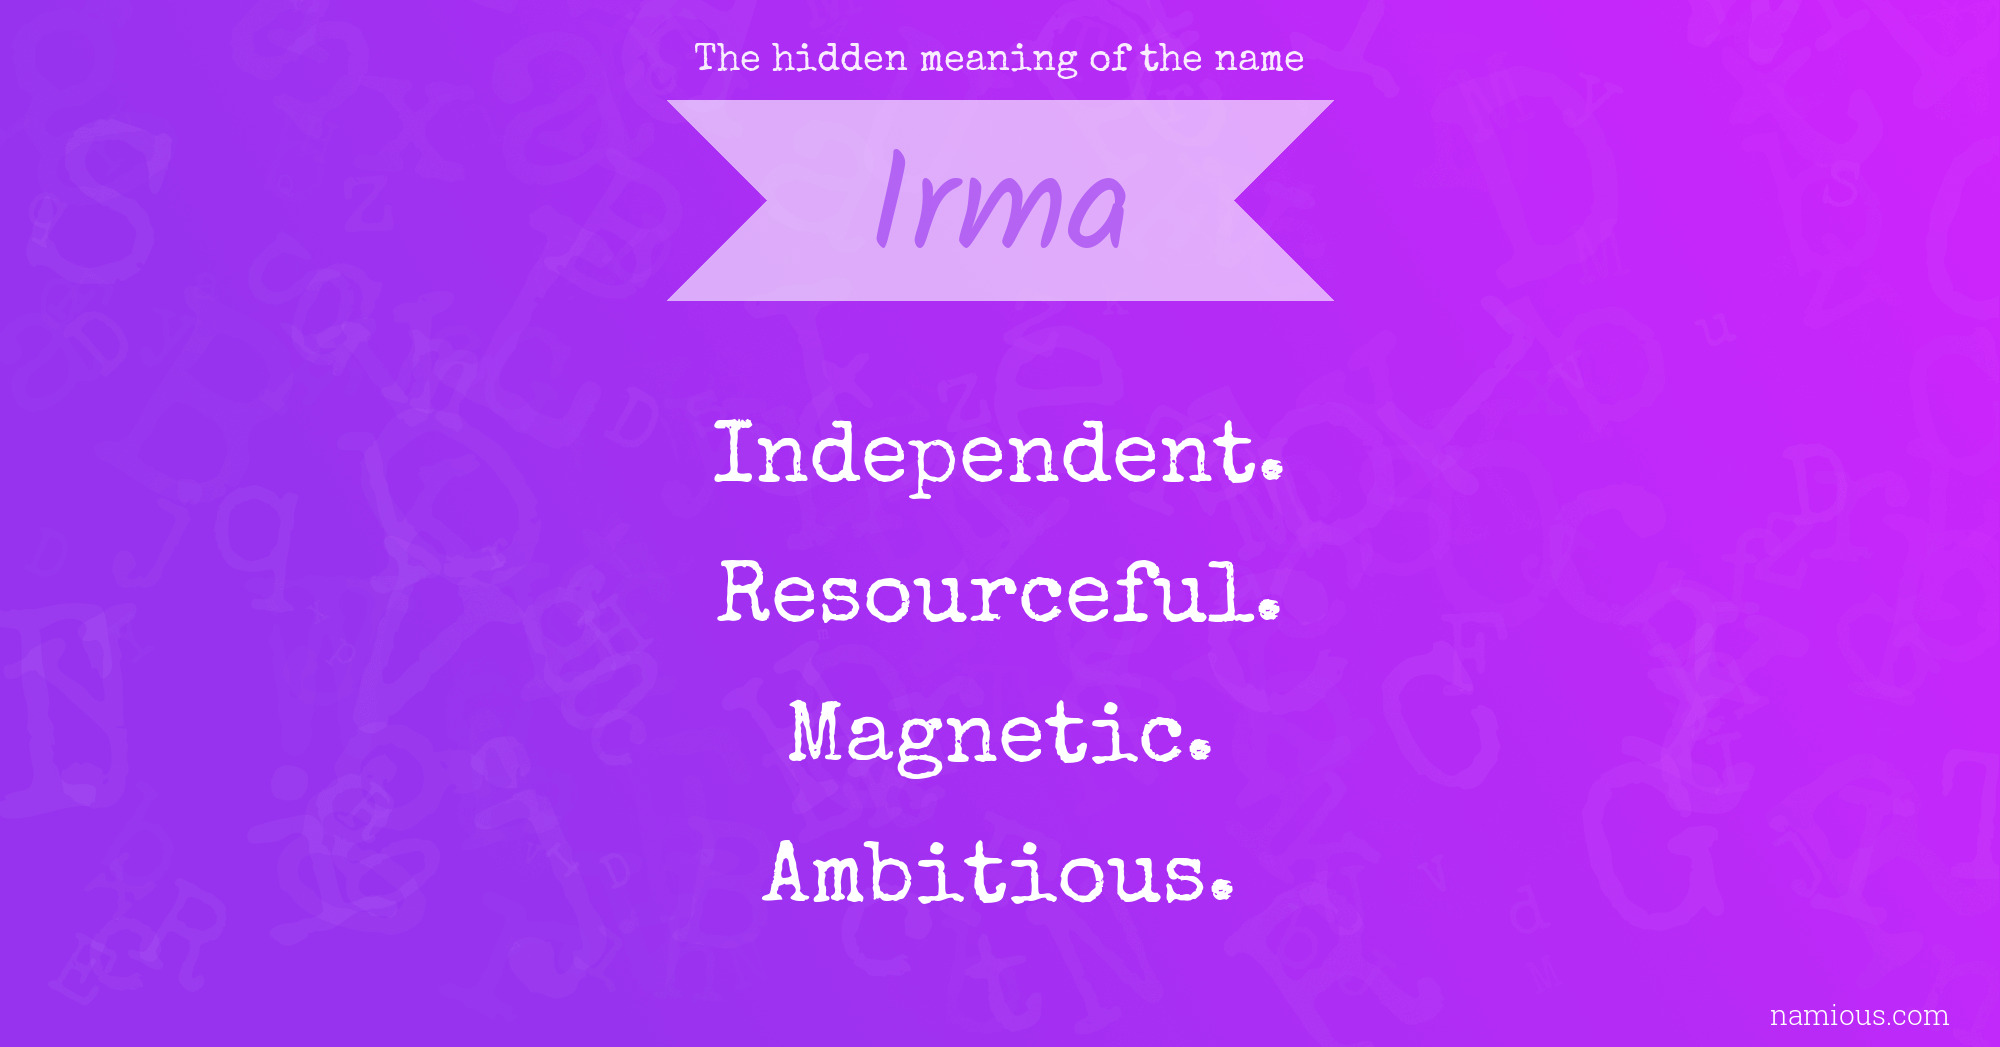 The hidden meaning of the name Irma